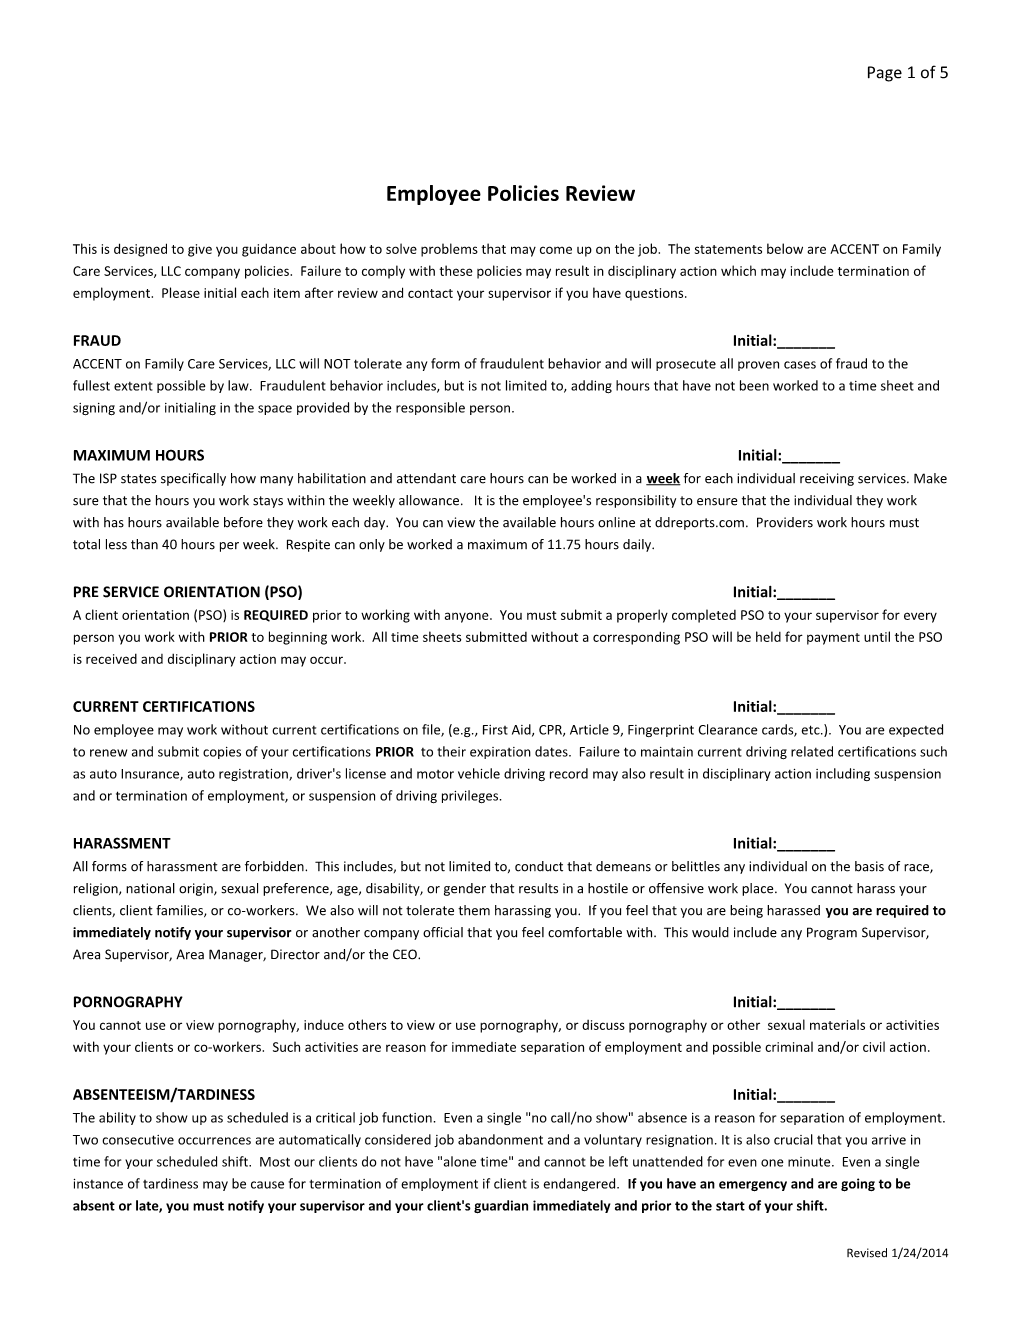 Employee Policies Review